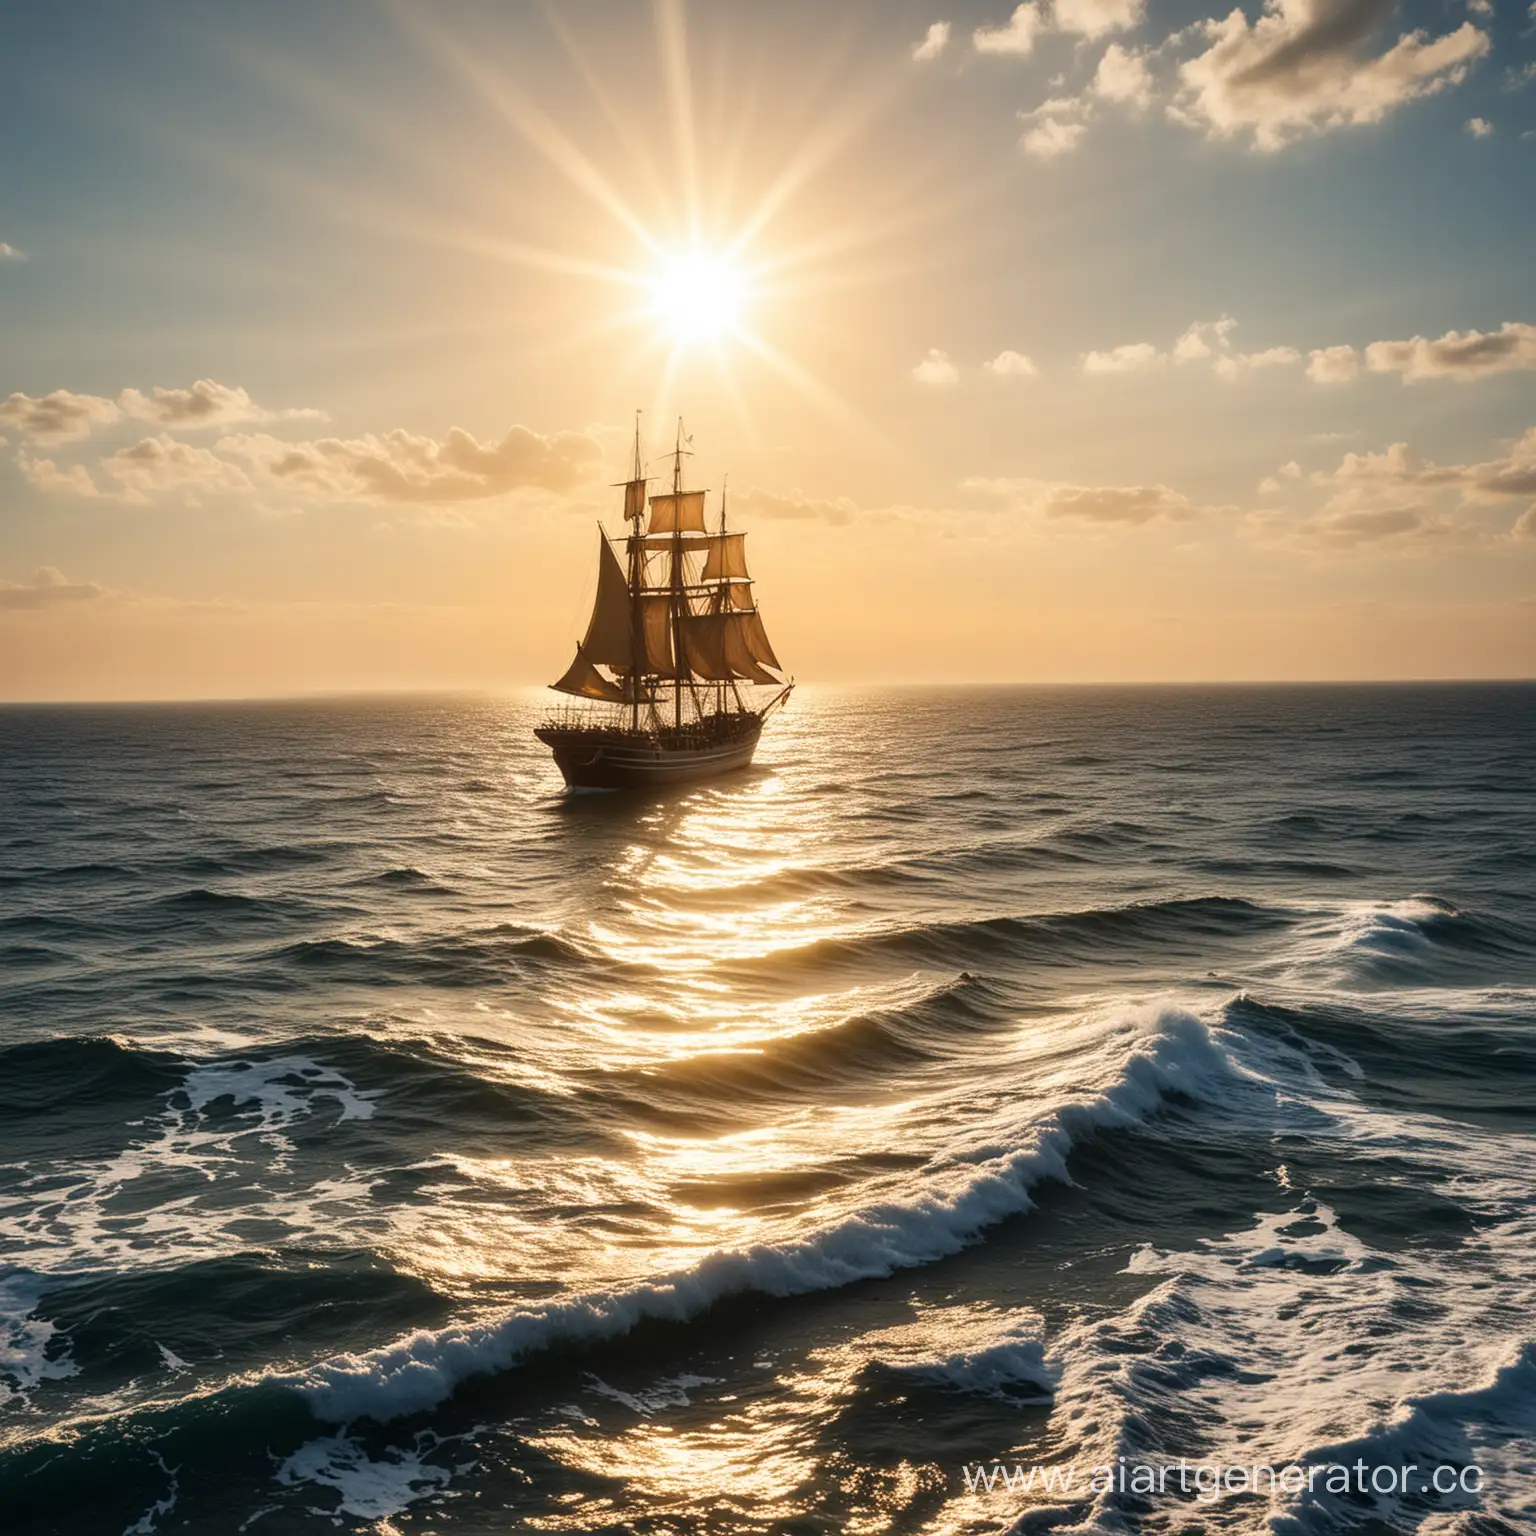 Glistening-Sunlit-Seascape-with-Sailing-Ships